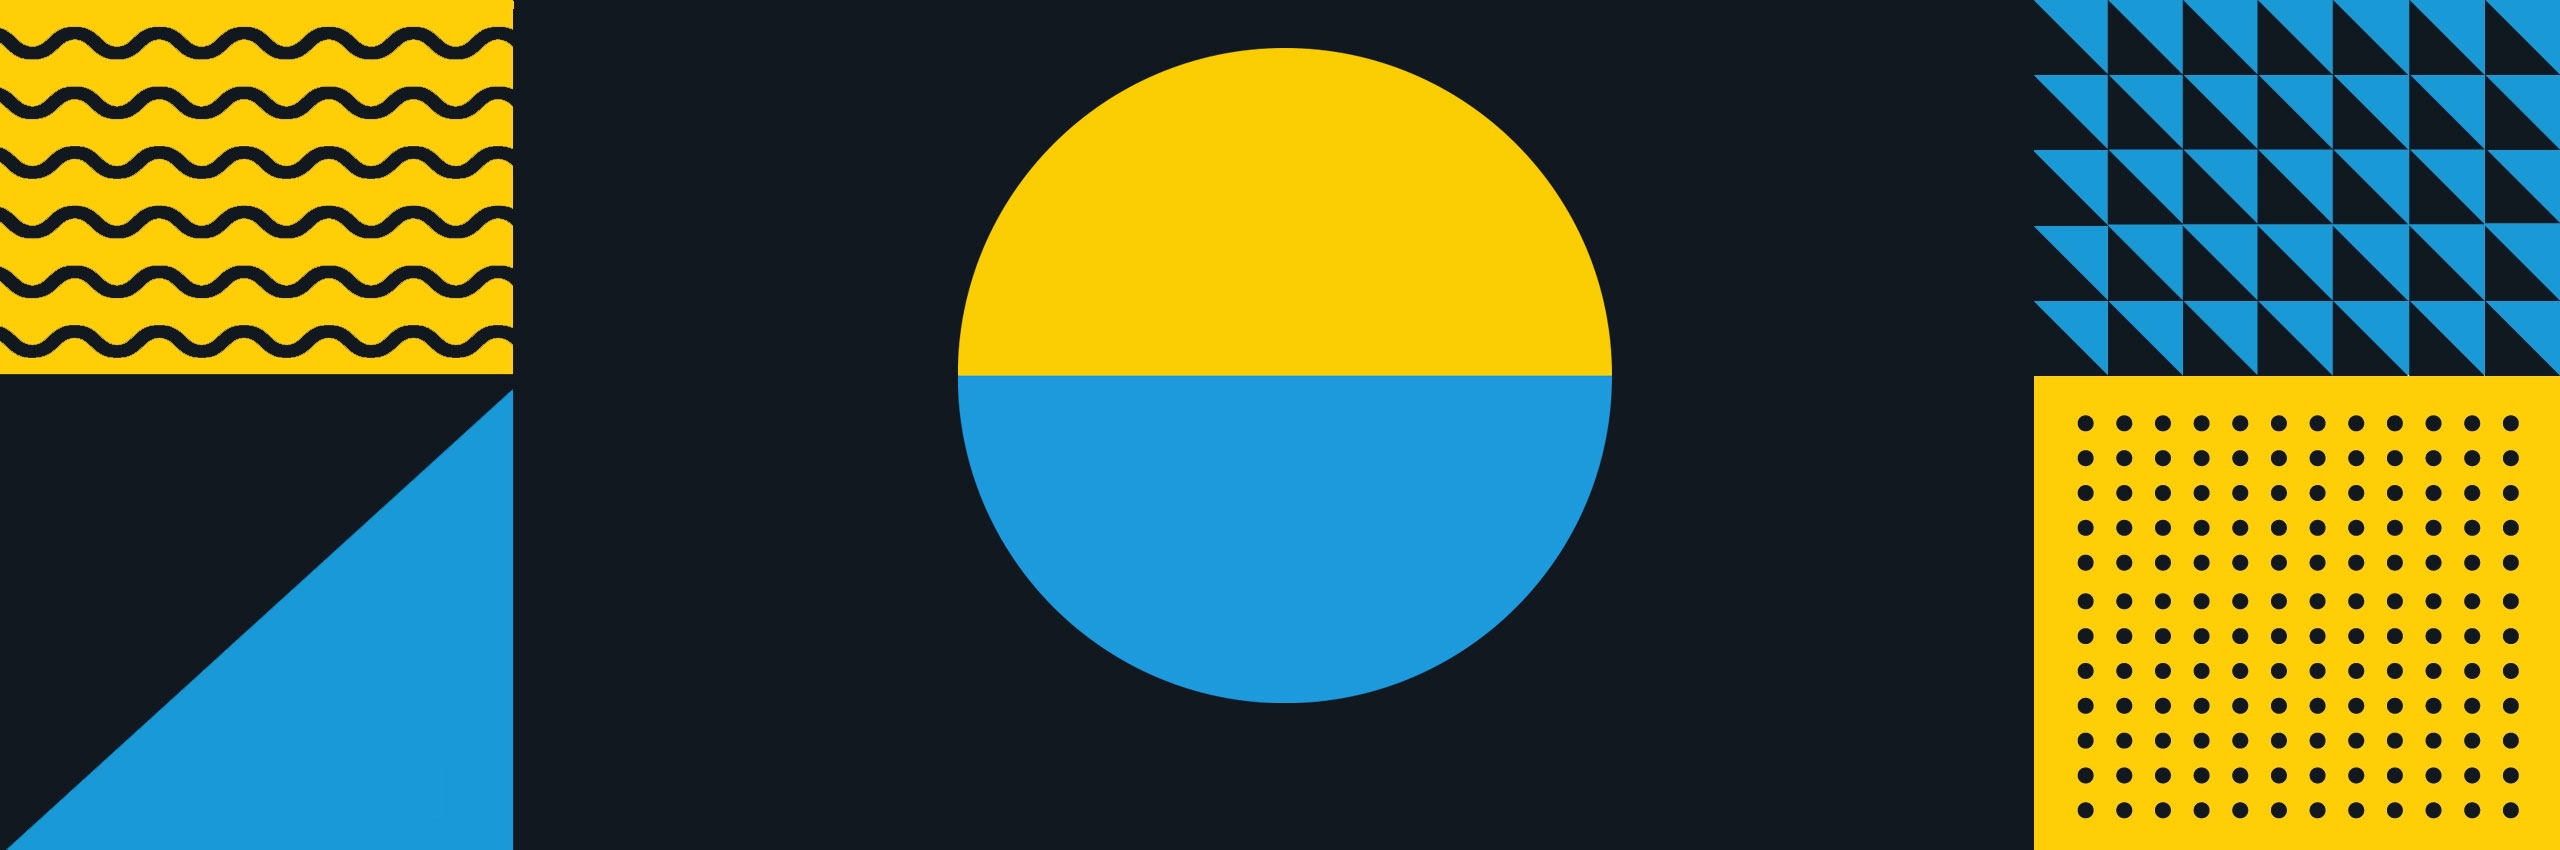 yellow and blue orb